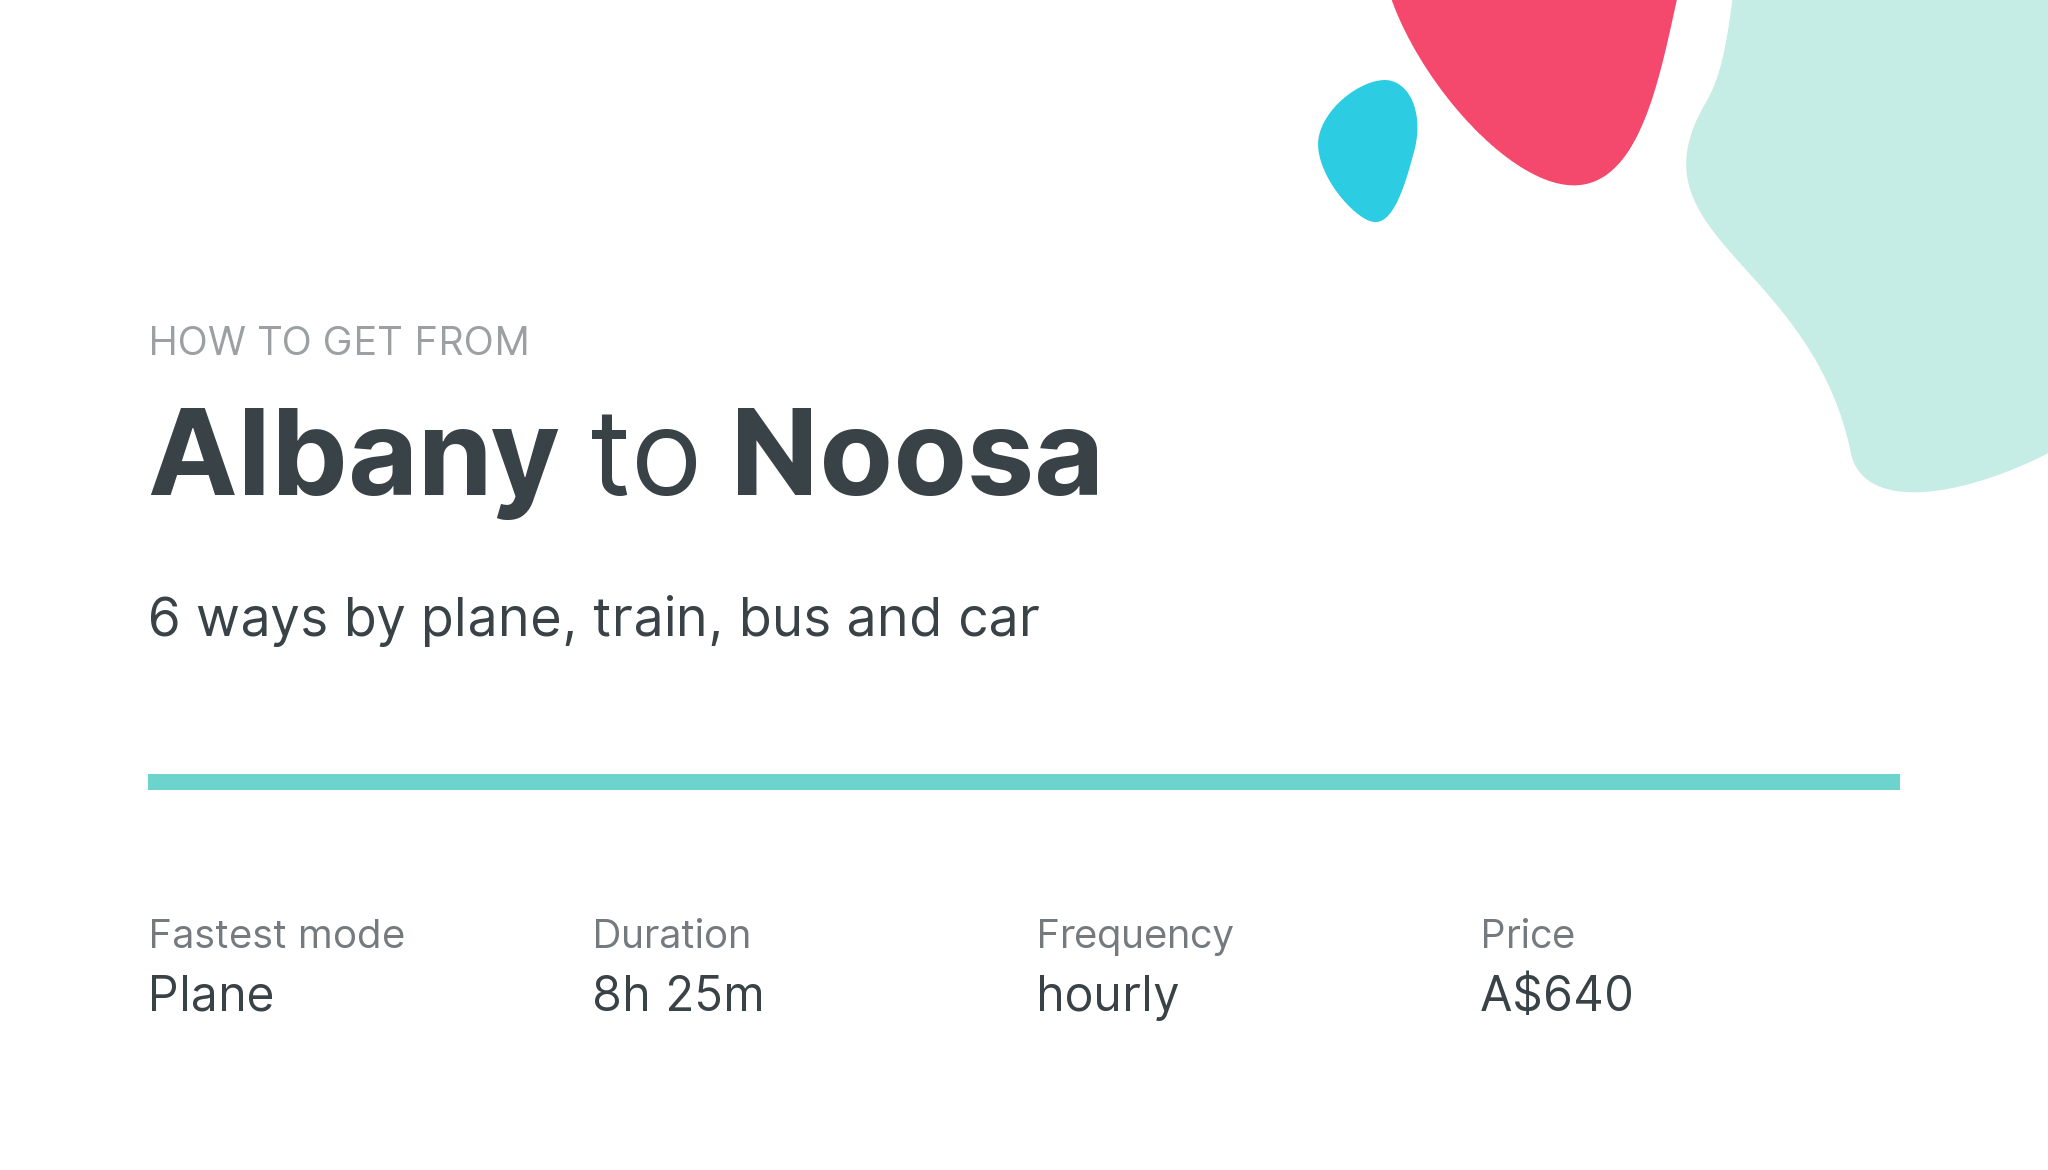 How do I get from Albany to Noosa